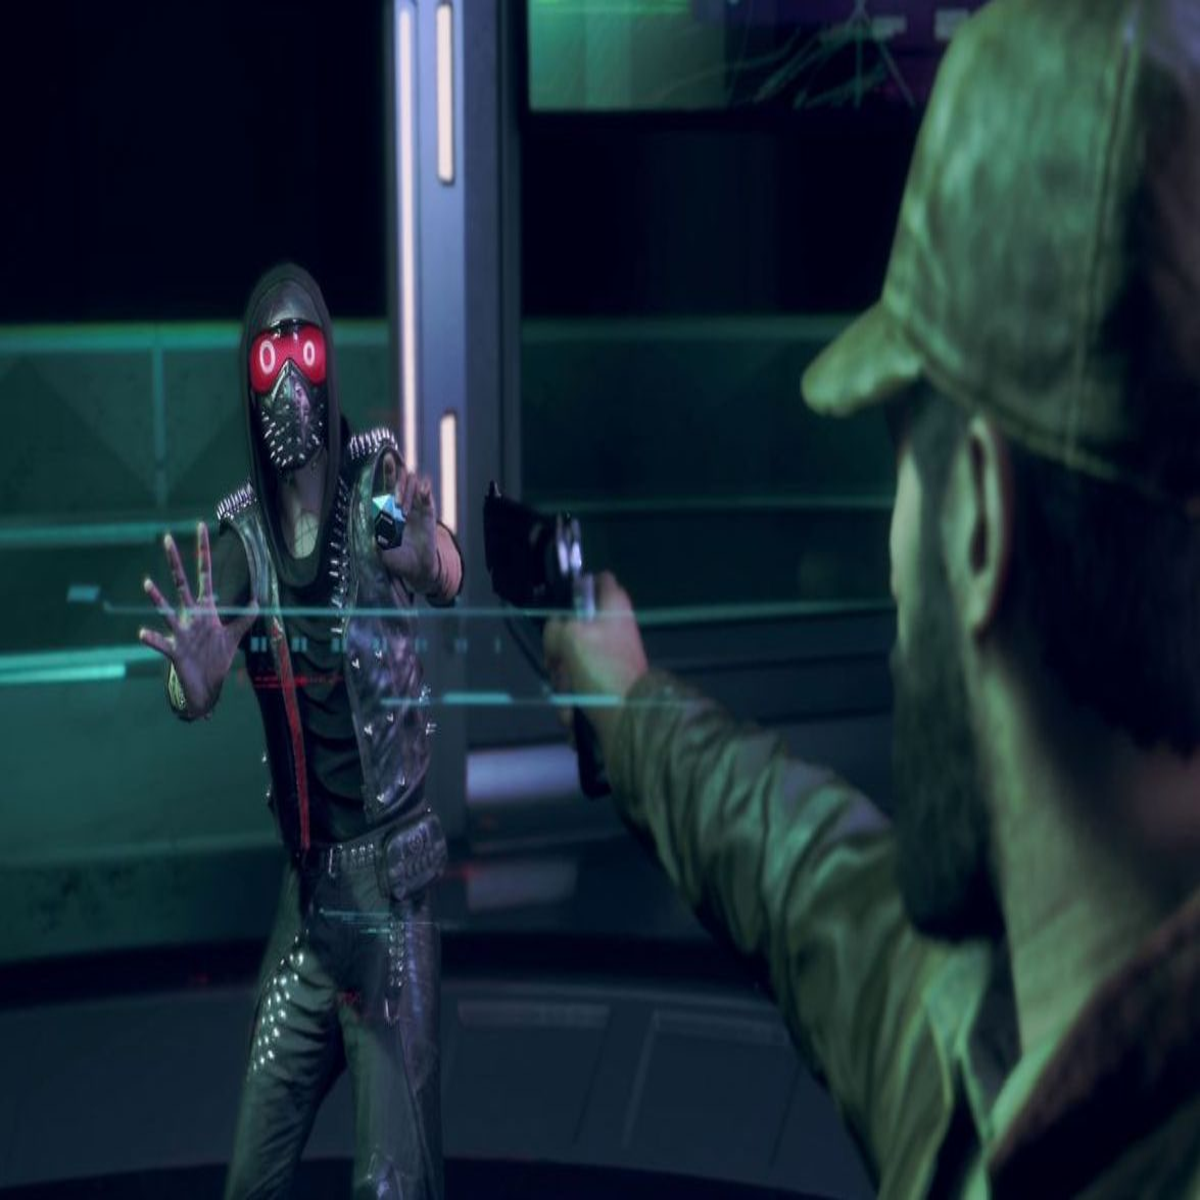 Watch Dogs: Legion – Bloodline DLC Featuring Aiden Pearce is Available Now